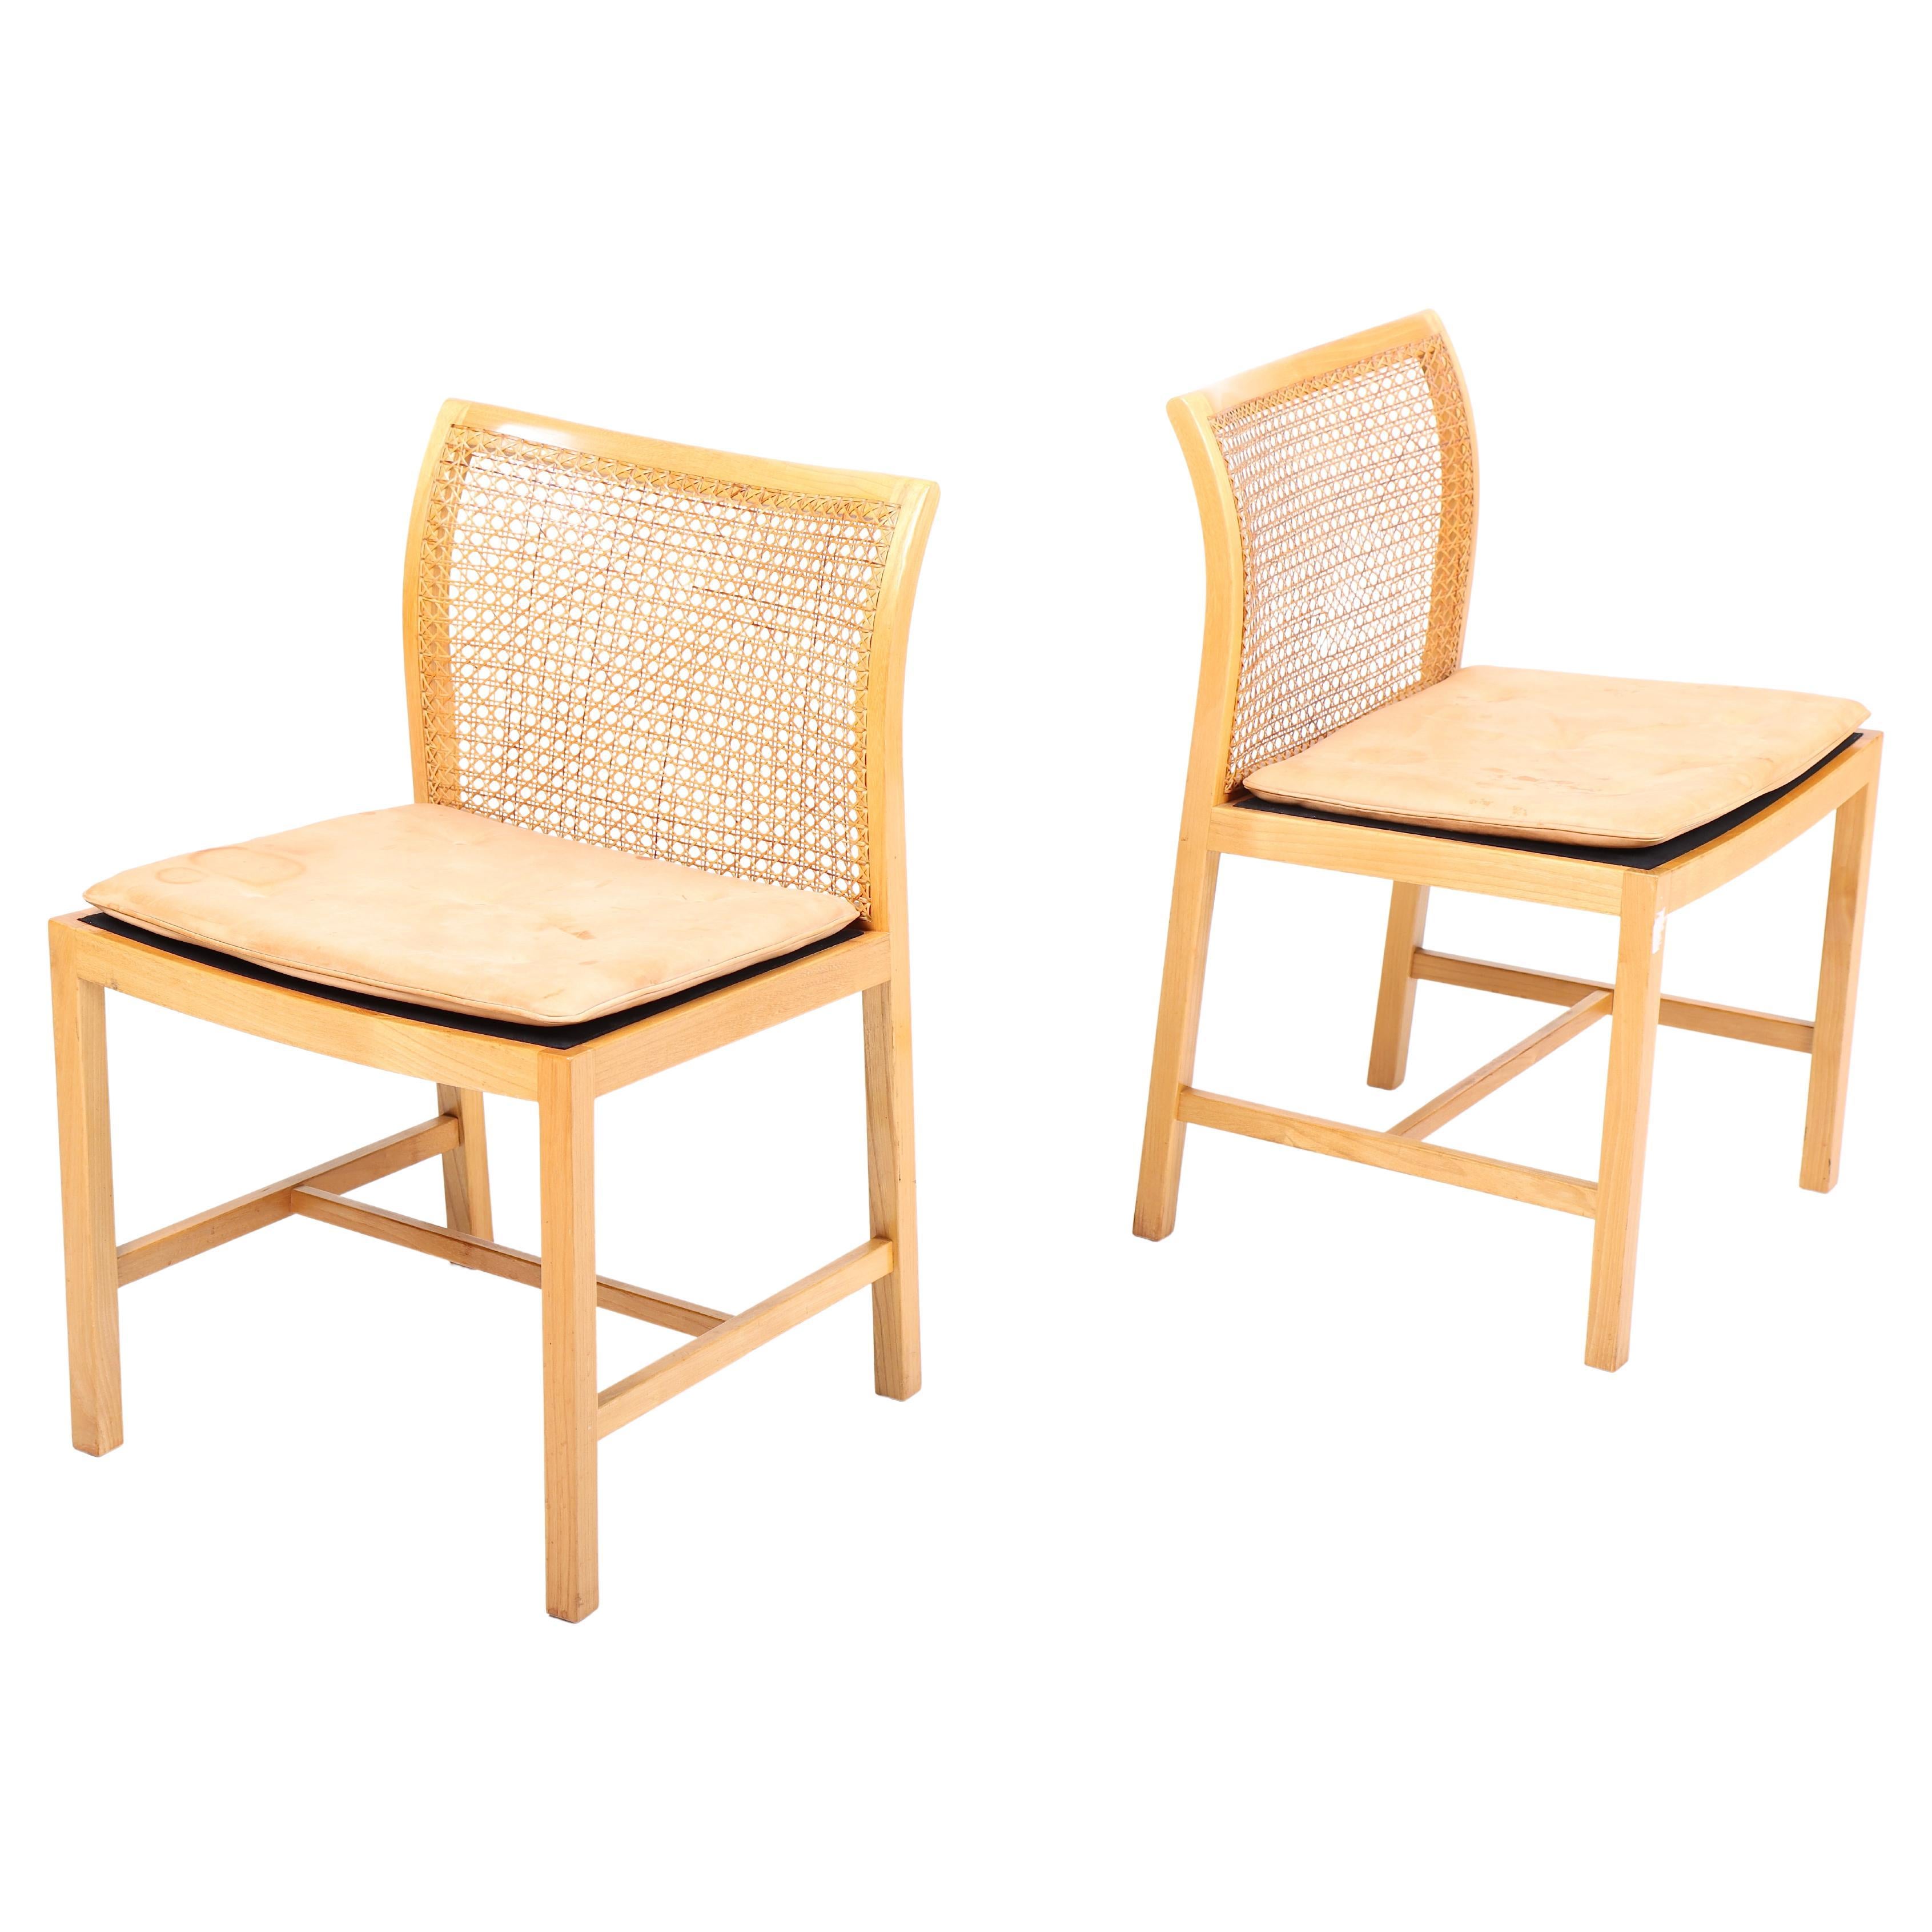 Pair of Danish Midcentury Side Chairs in Ash and Cognac Leather, 1960s